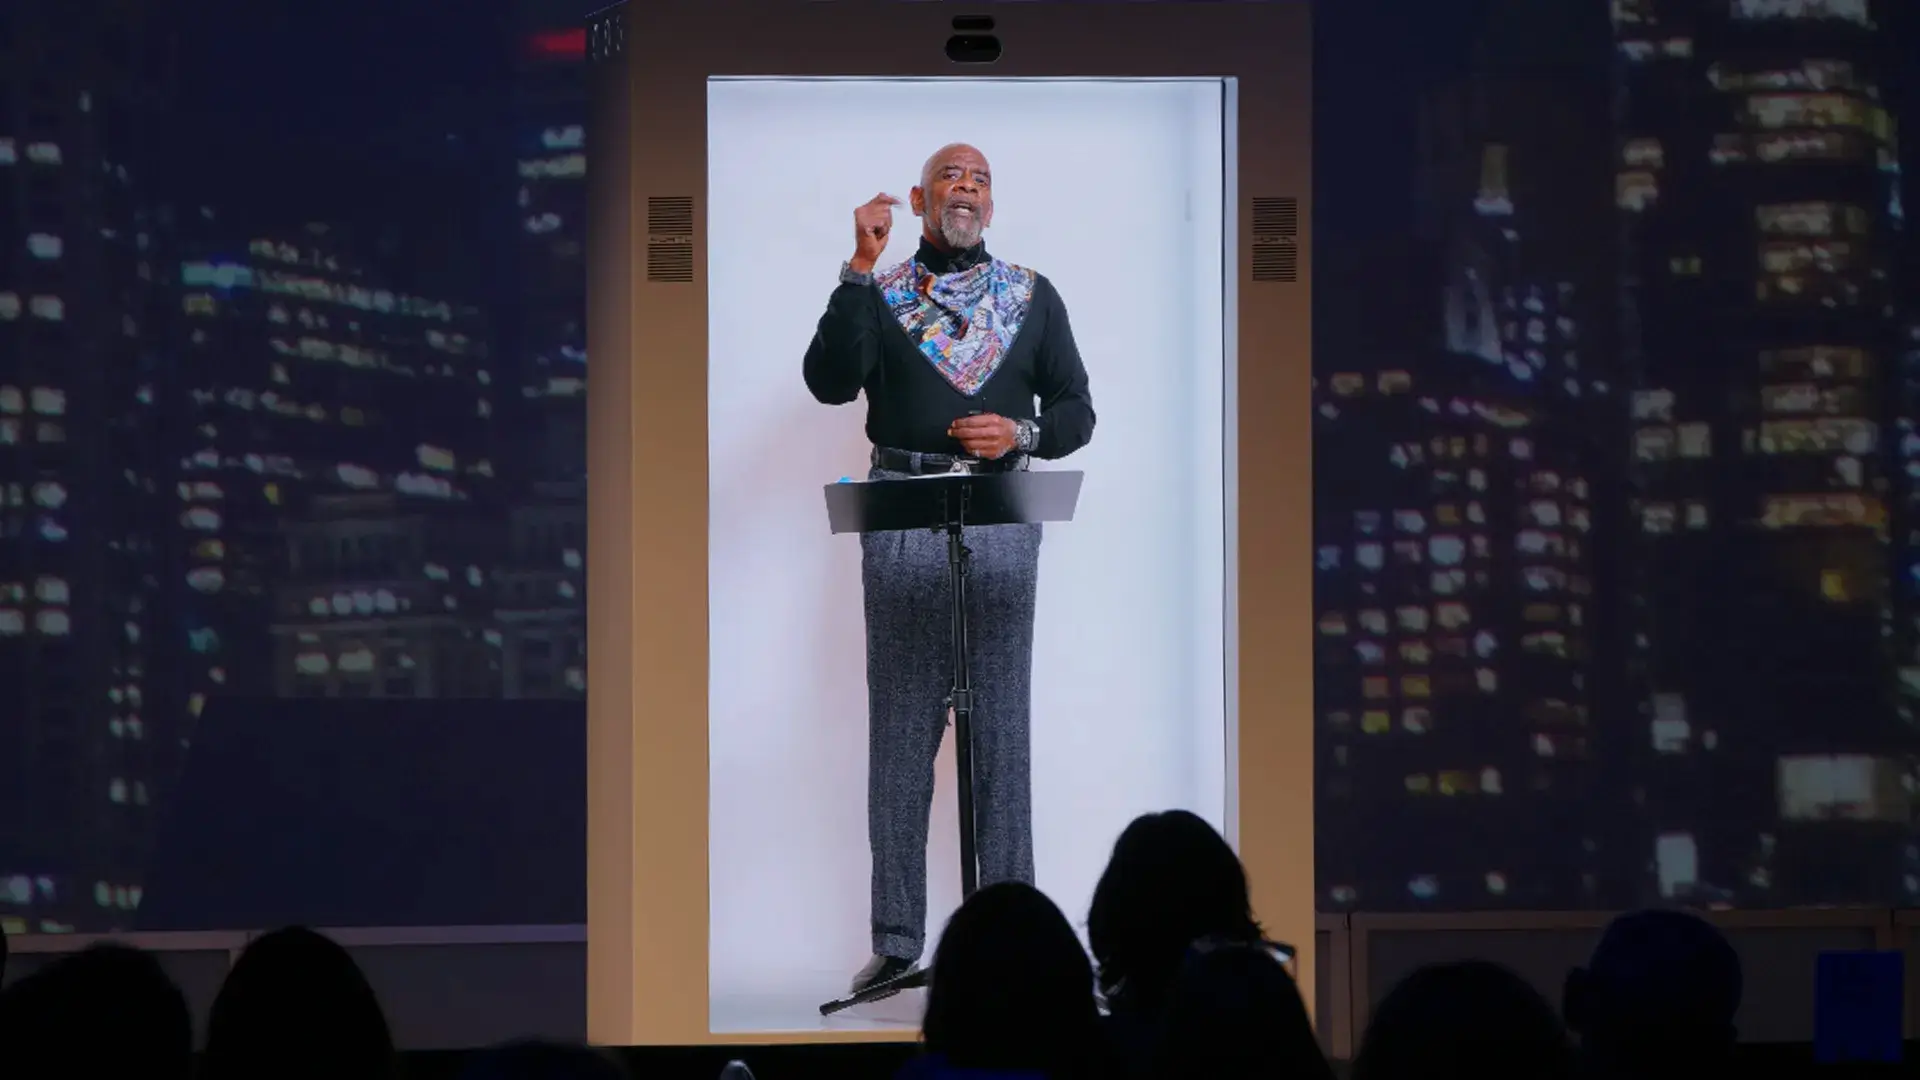 Beam Me Up, Scotty! Holographic Teleportation Brings the World to Your Living Room